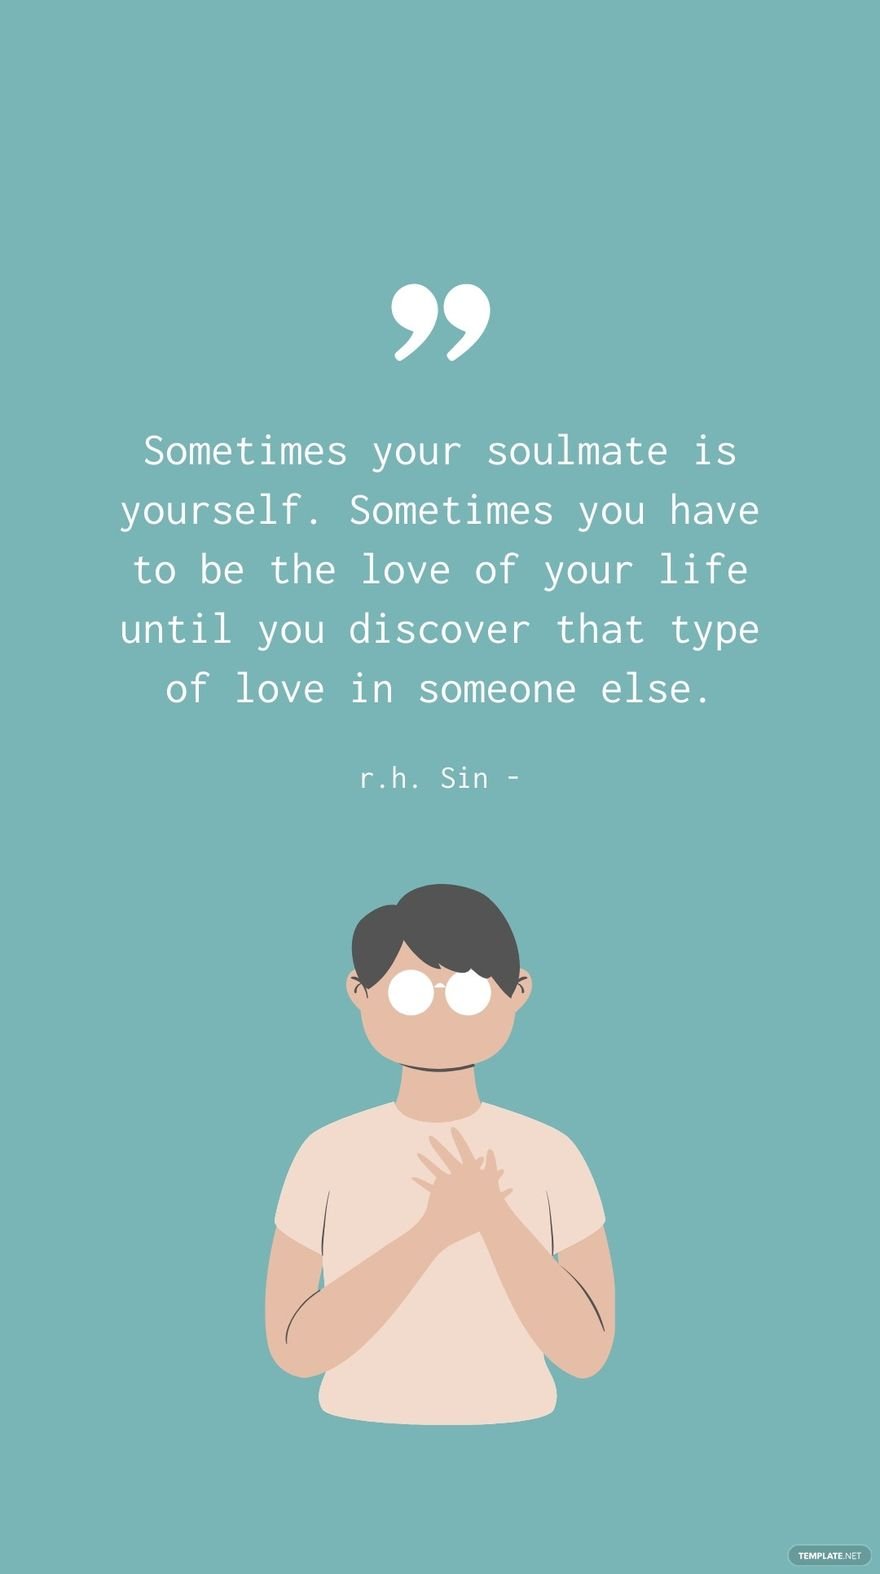 r.h. Sin - Sometimes your soulmate is yourself. Sometimes you have to be the love of your life until you discover that type of love in someone else.